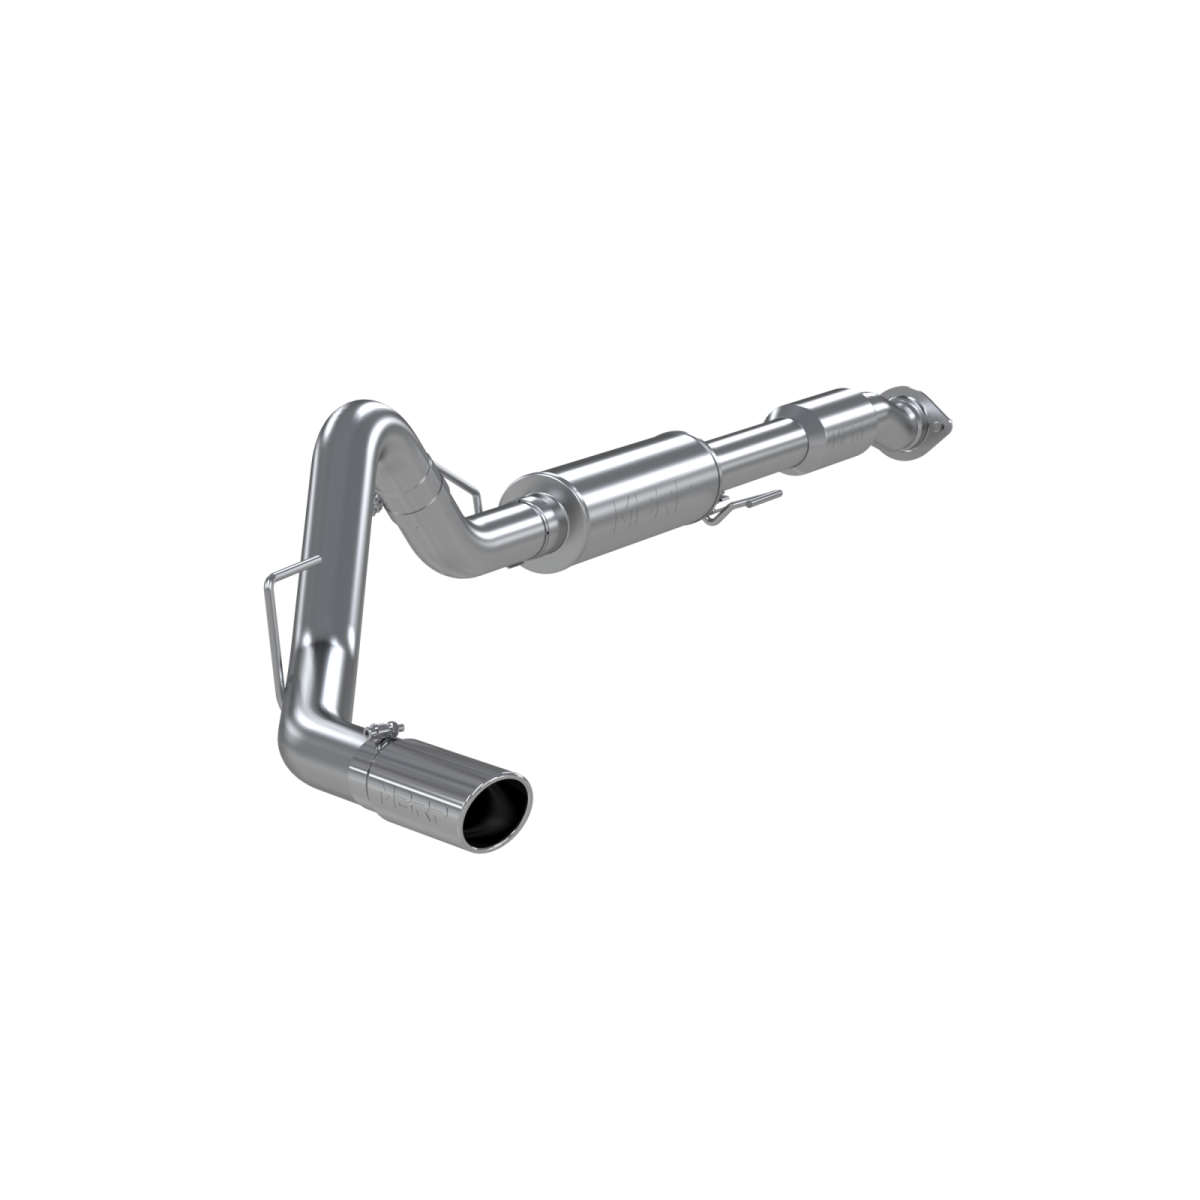 MBRP - MBRP 3 1/2 Inch Cat Back Exhaust System Single Exit For 11-14 Ford F-150 Raptor 6.2L Crew Cab/Short Bed Extended Cab Short Bed Aluminized Steel S5228AL